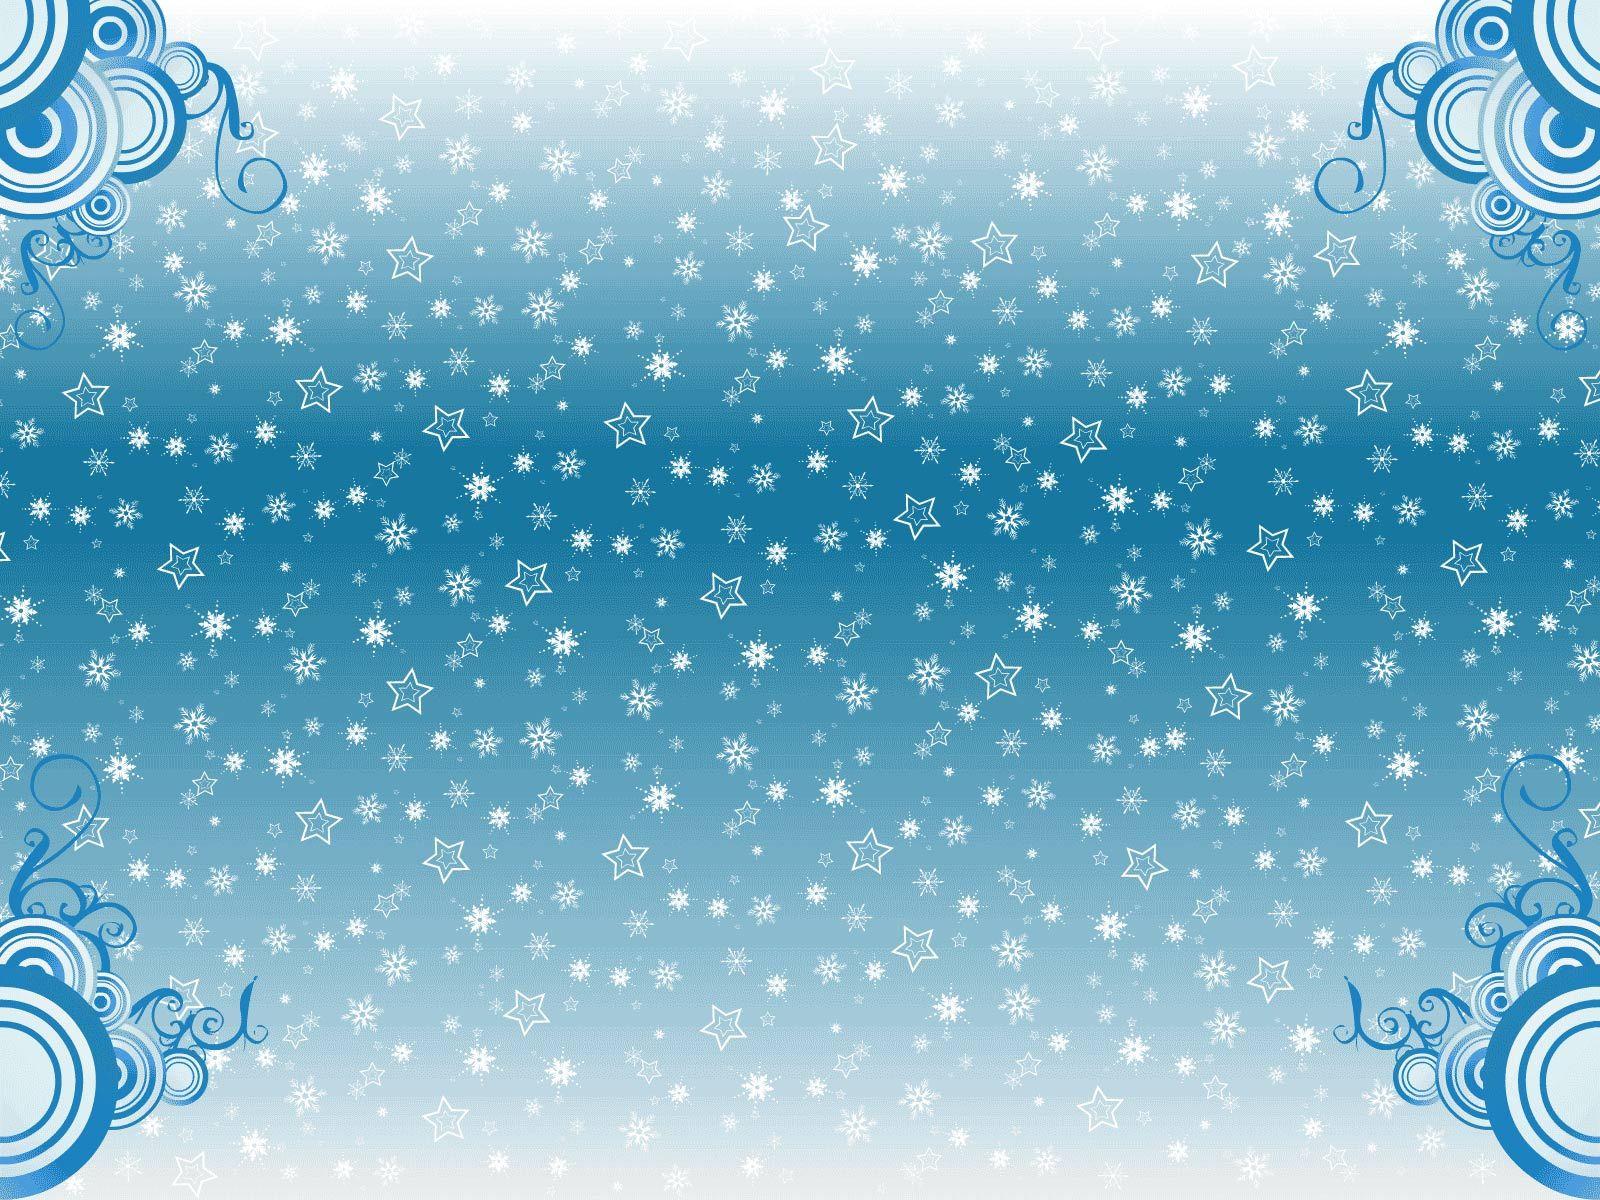 Background Winter Quality Image